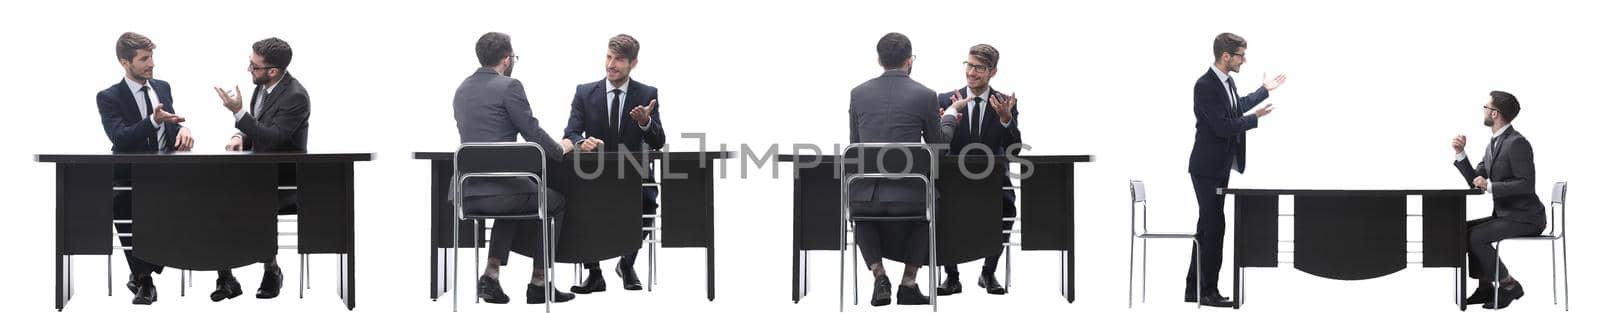 two business people sitting at the Desk. partnership concept